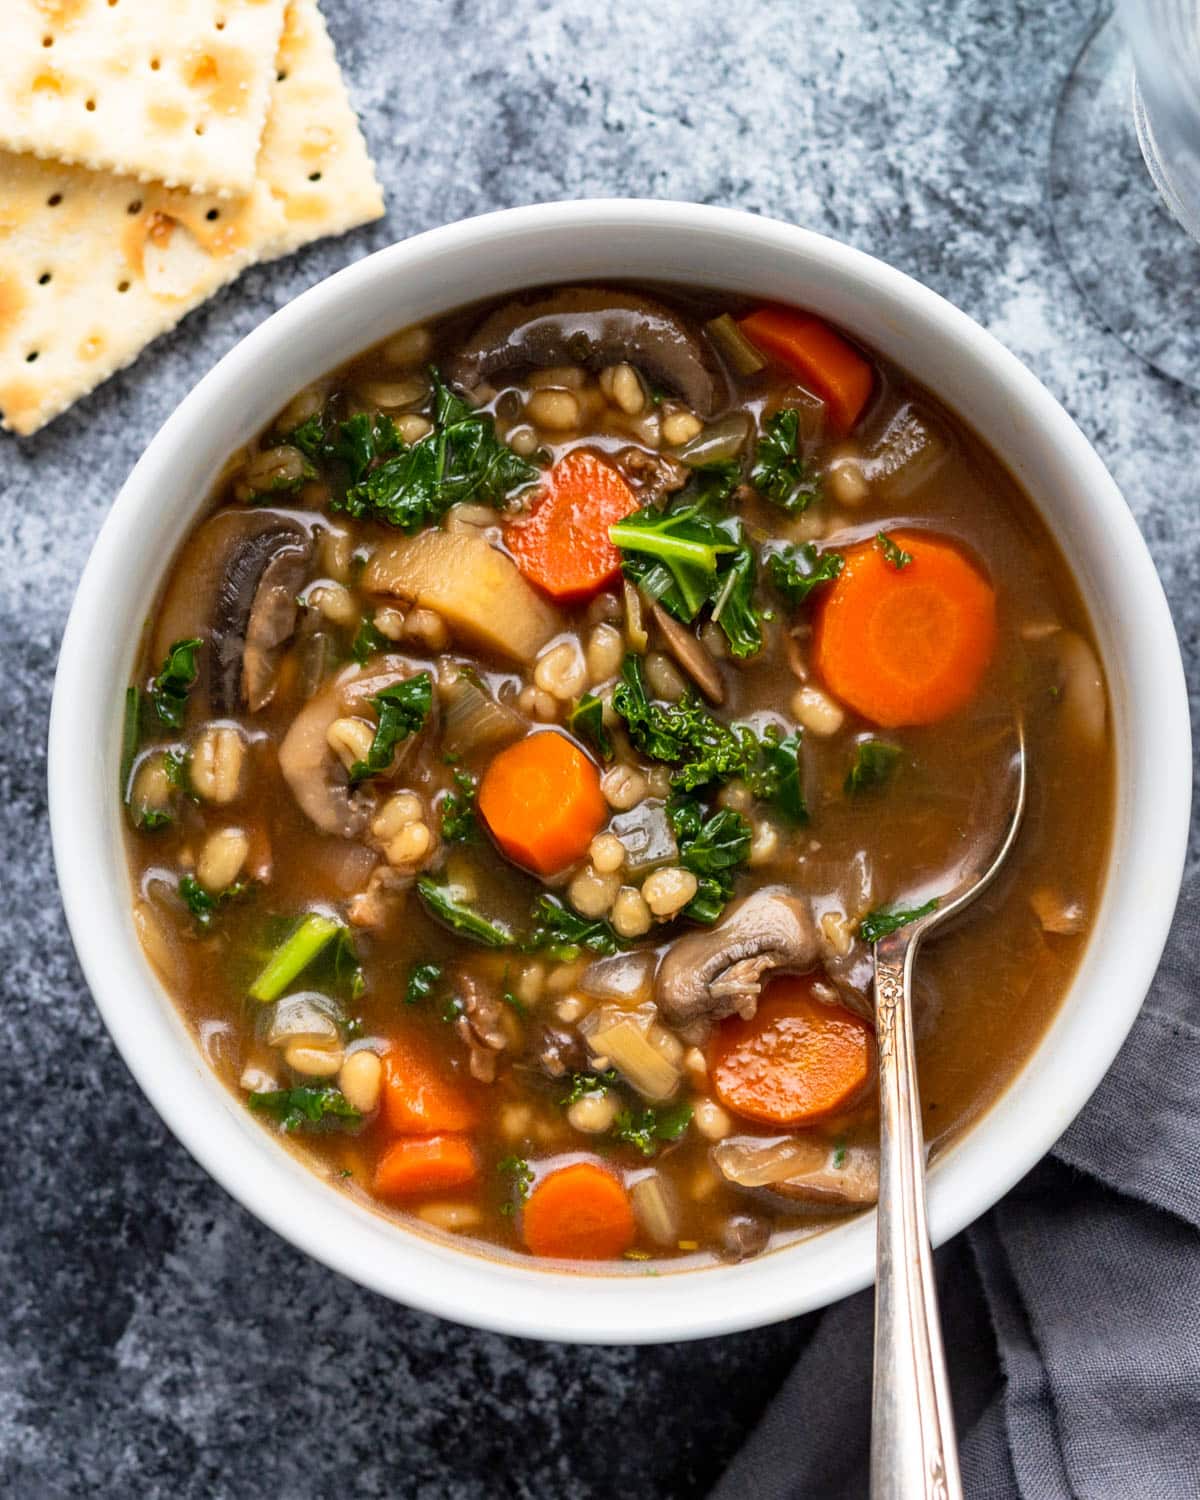 A bowl of mushroom barley soup with carrots and saltines on the side.